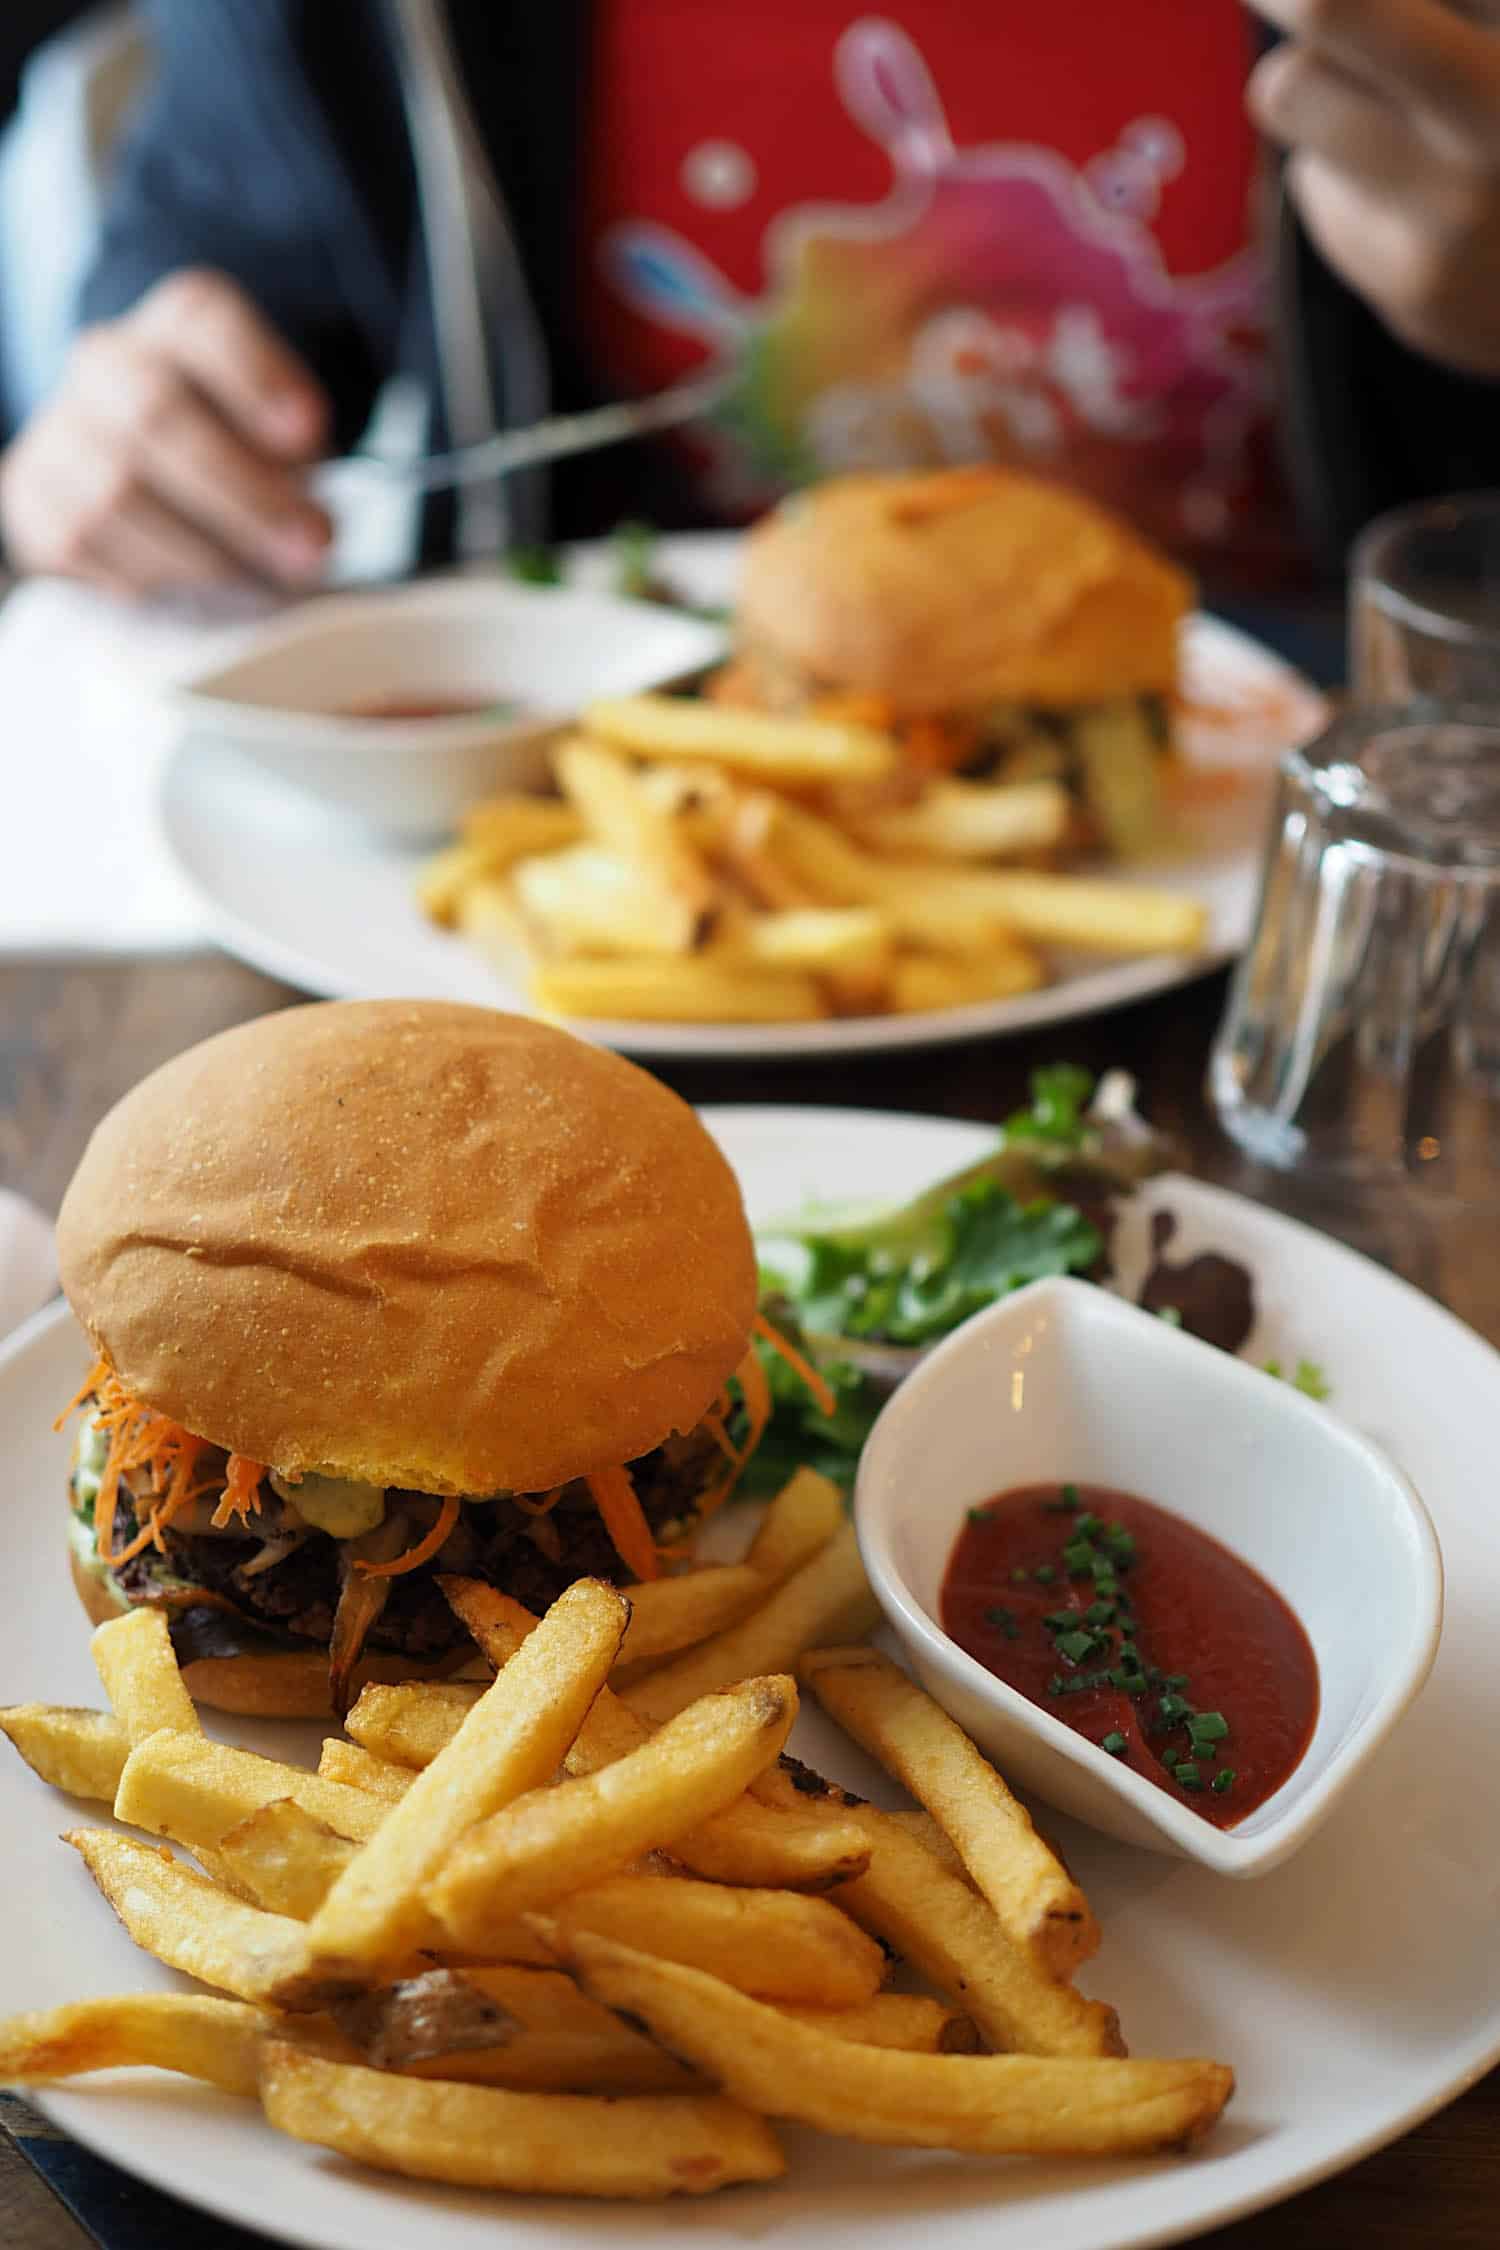 Cheeseburger and fries on a plate